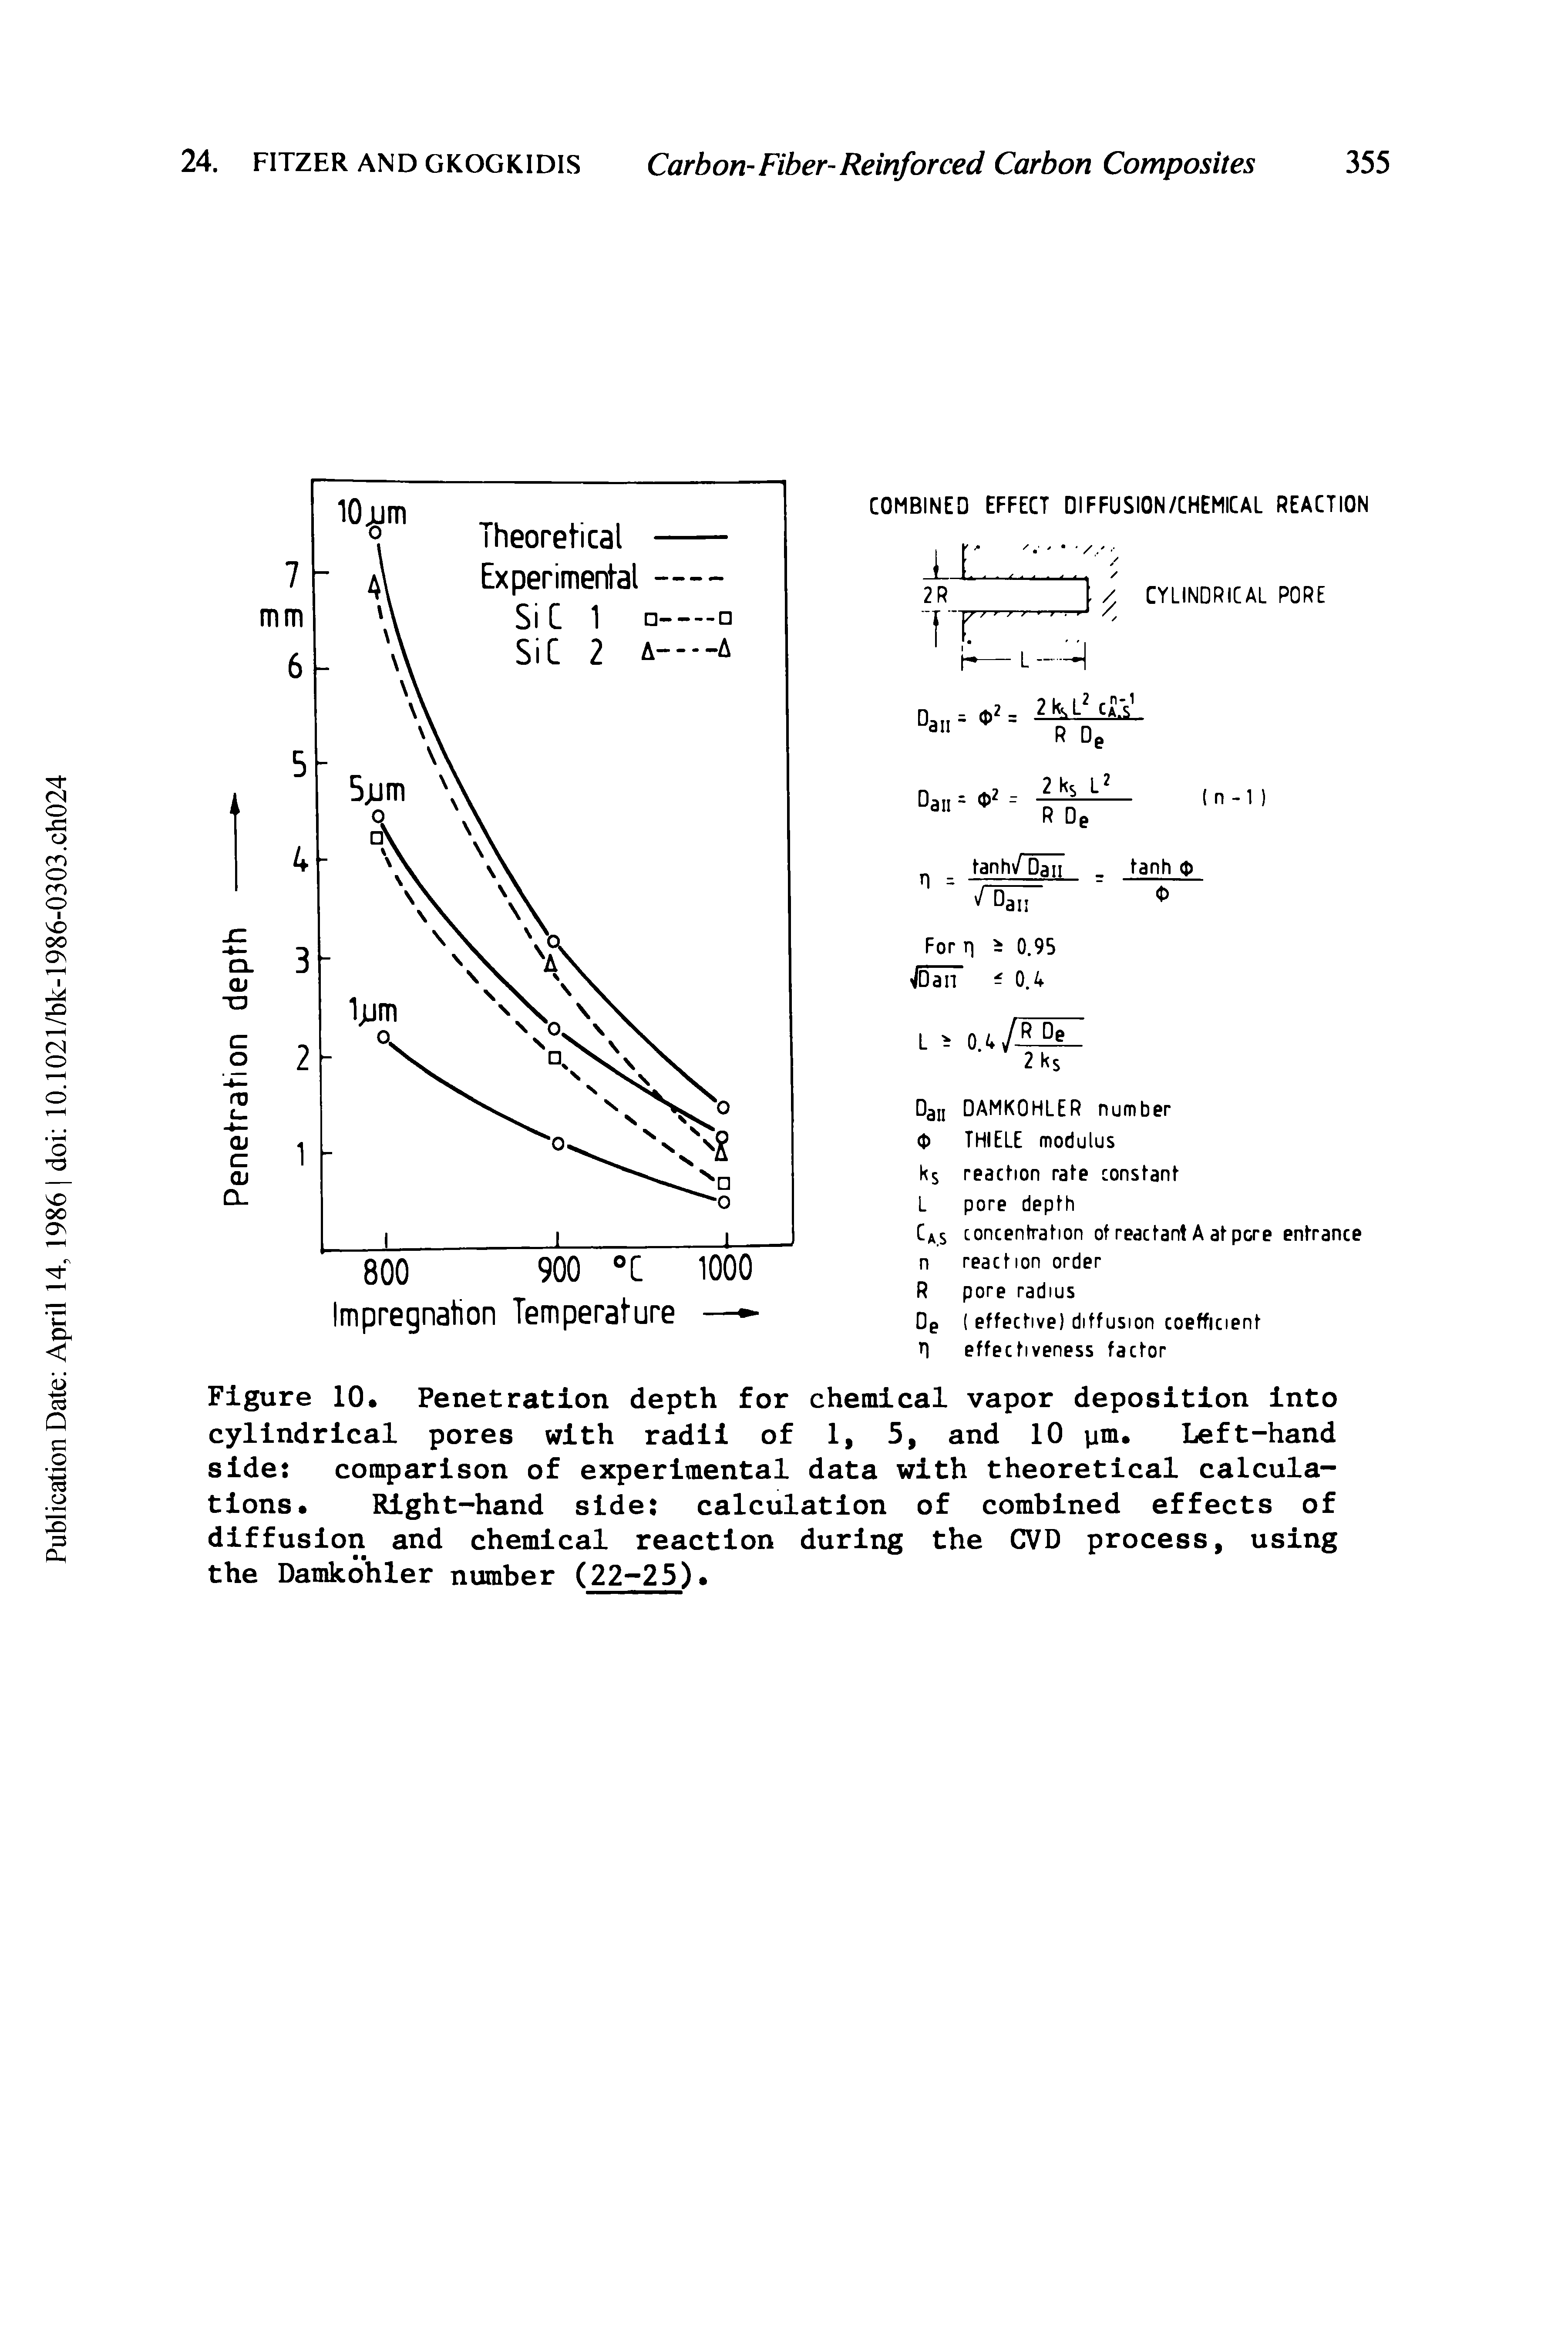 Figure 10. Penetration depth for chemical vapor deposition into cylindrical pores with radii of 1, 5, and 10 pm. Left-hand side comparison of experimental data with theoretical calculations. Right-hand side calculation of combined effects of diffusion and chemical reaction during the CVD process, using the Damkohler number (22-25).